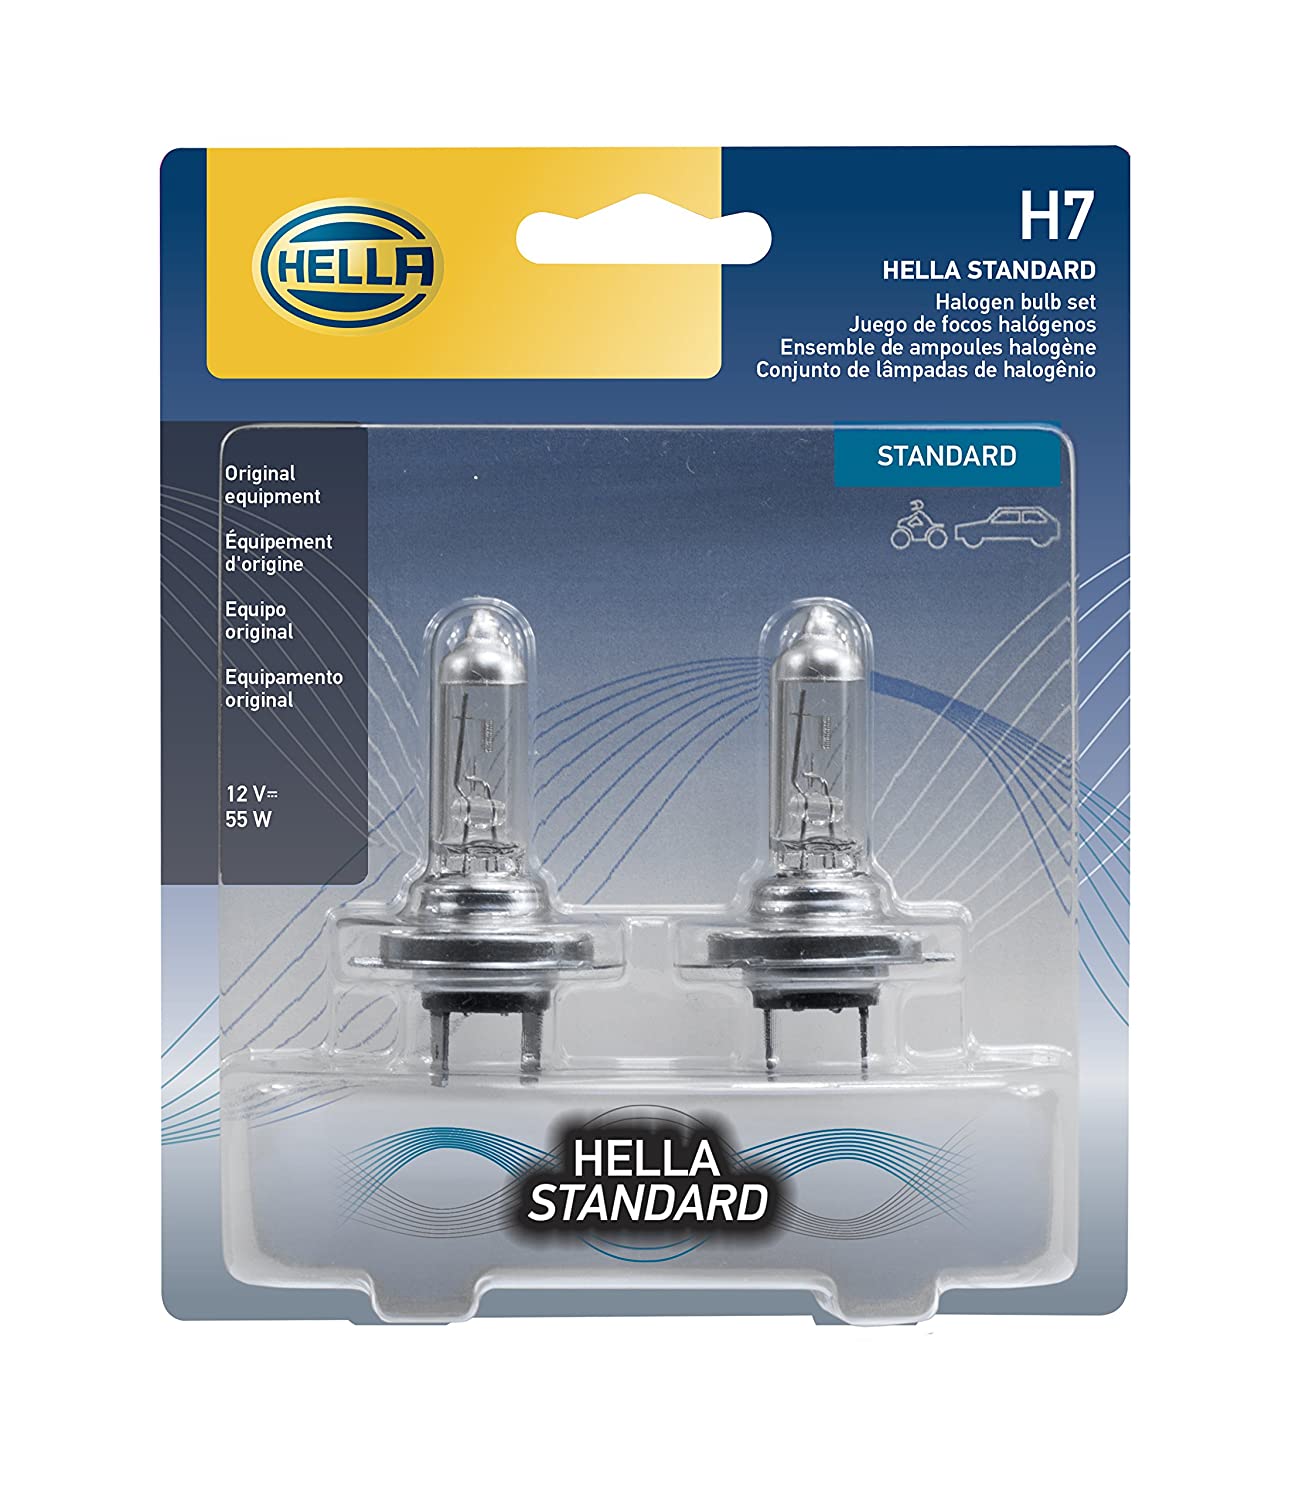 Review of a halogen lamp